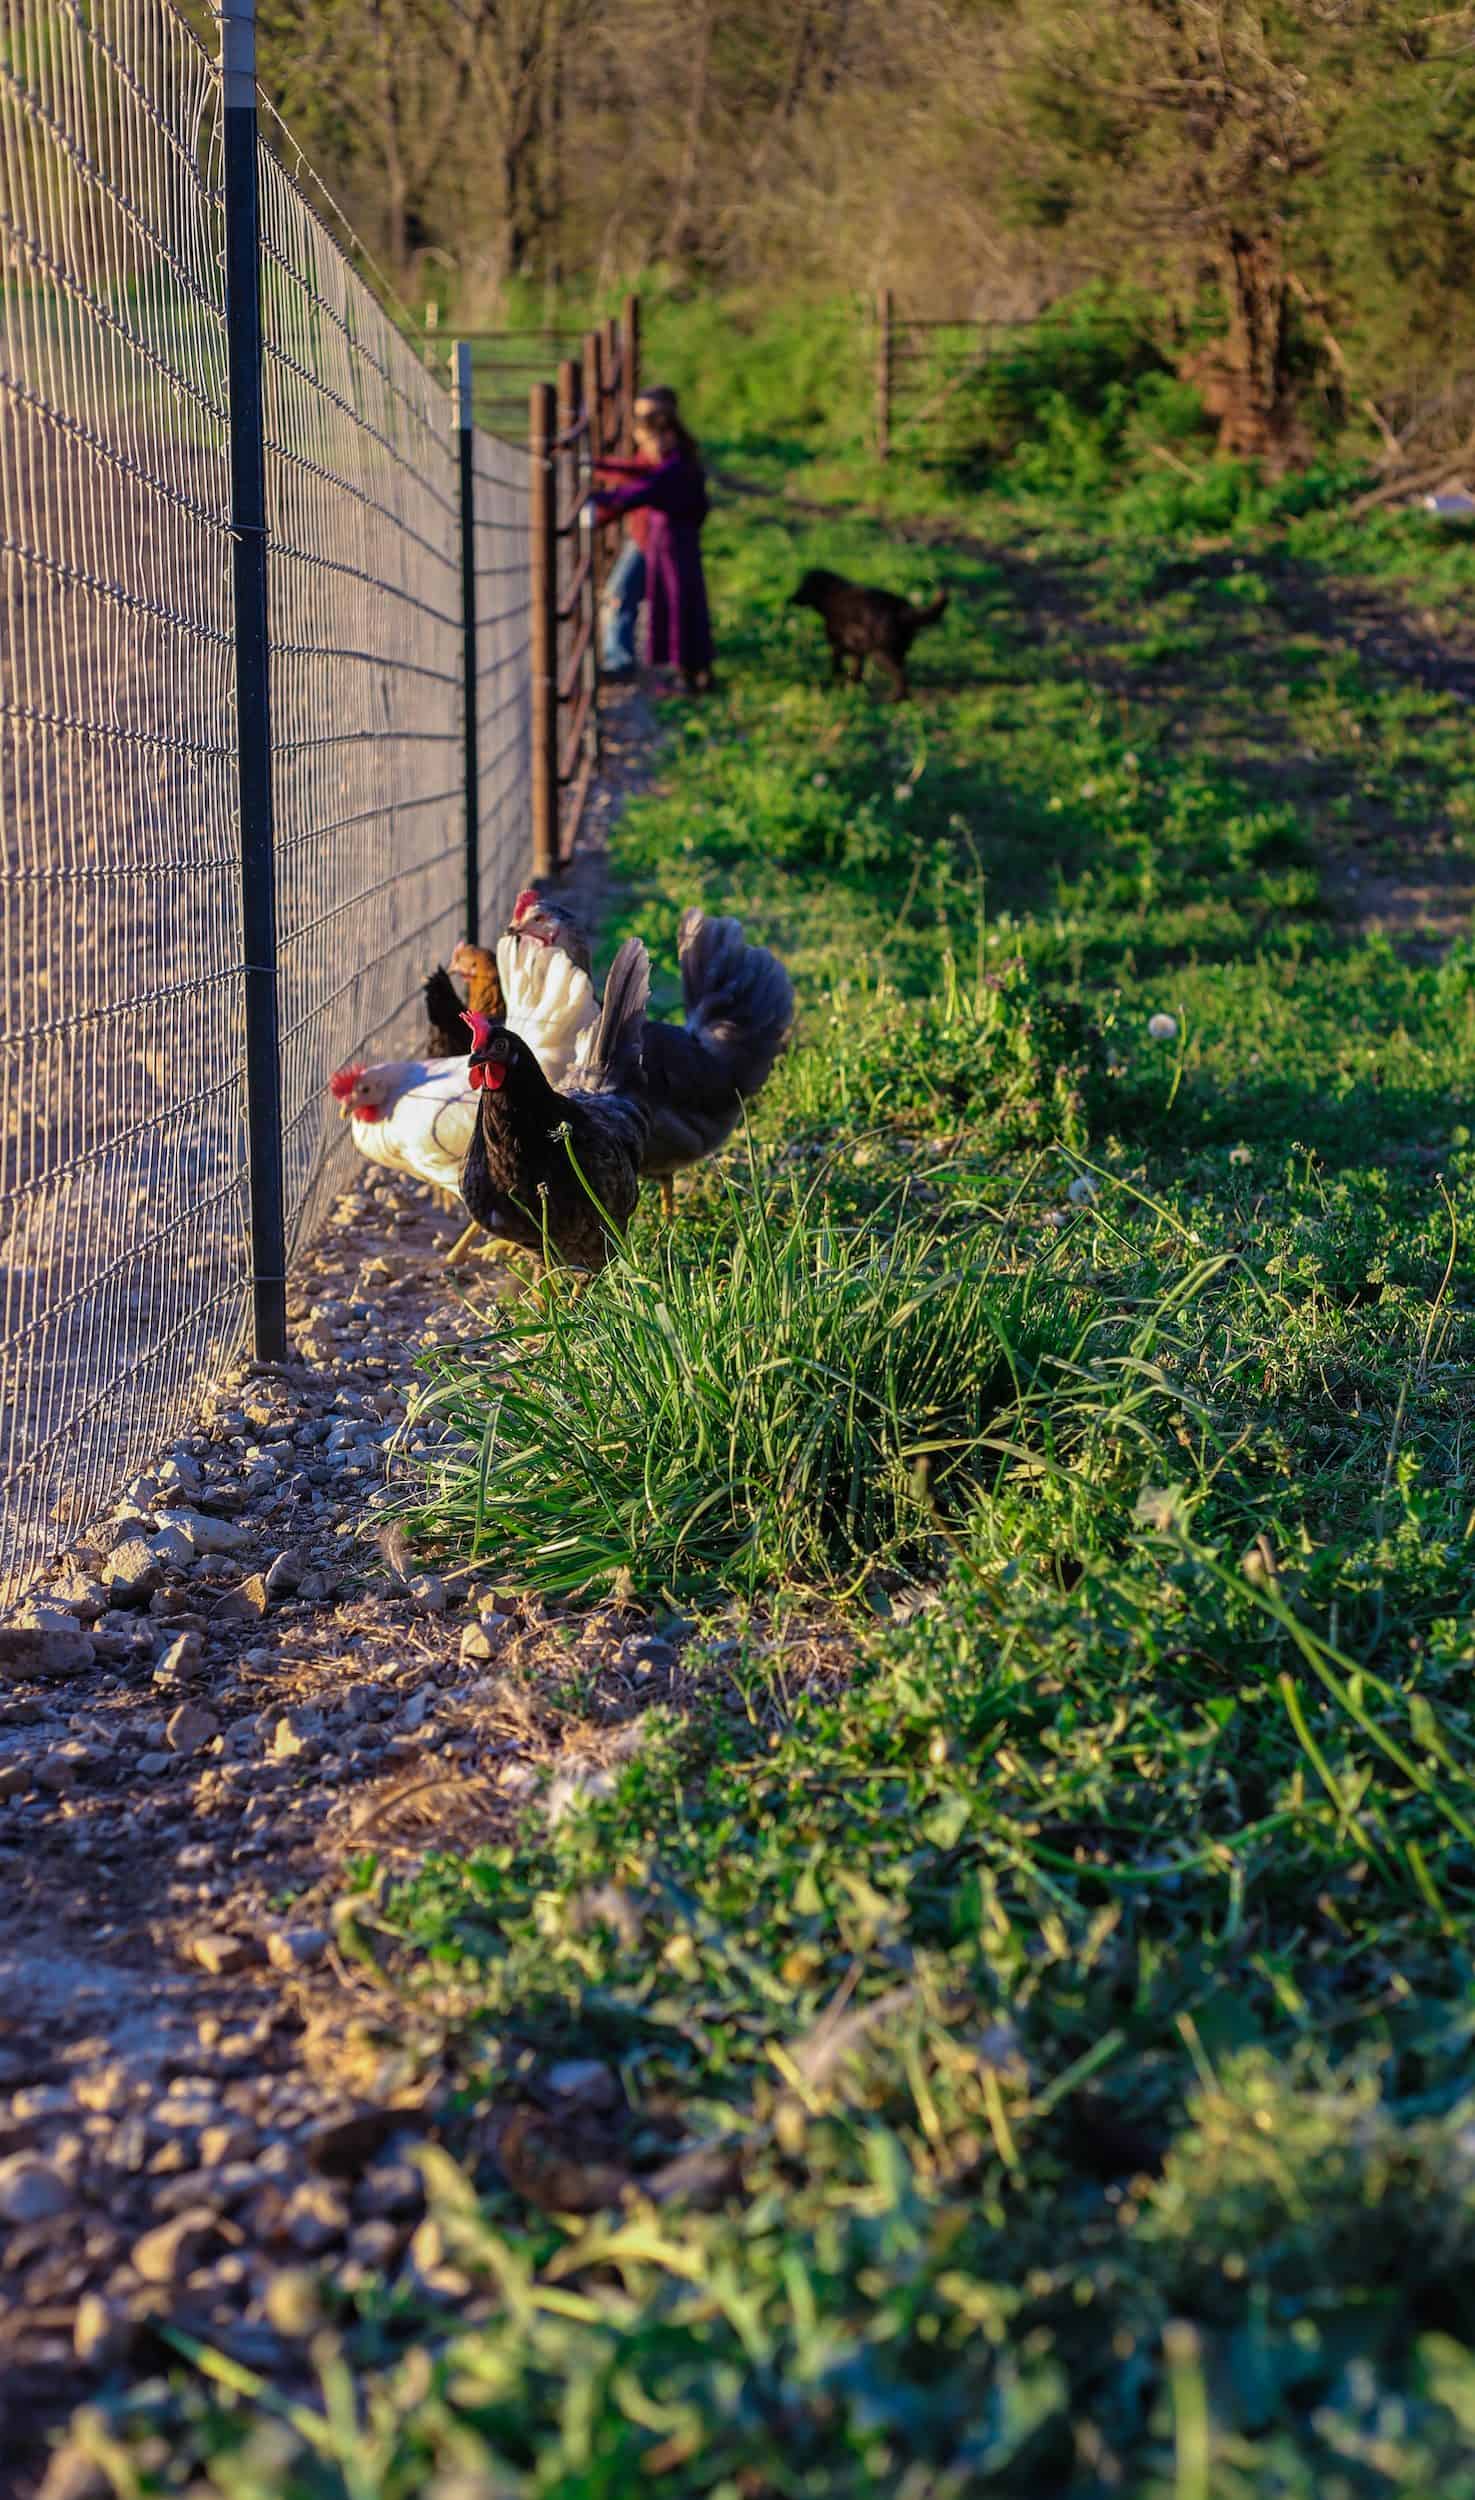 Pasture Raised Hens Near Wire Fencing